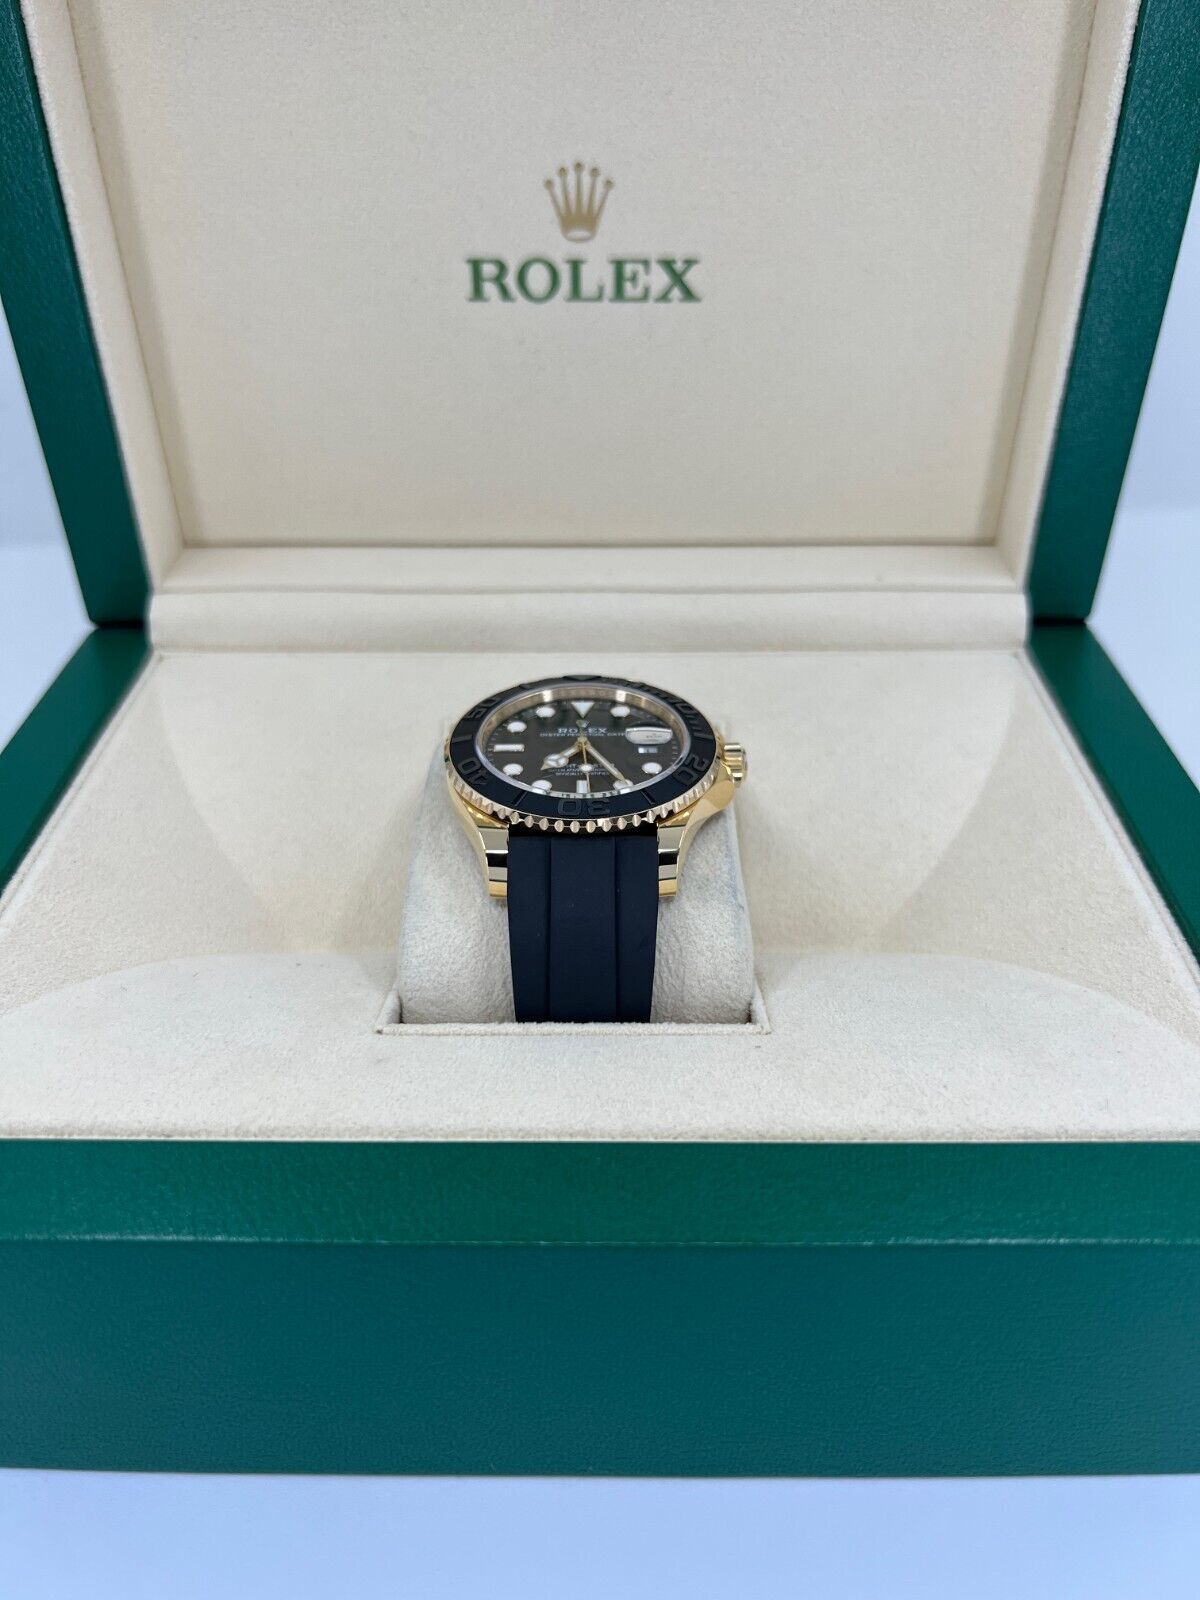 Rolex Yacht-Master 42mm, 18k Yellow Gold, Black Dial, Ref# 226658-0001, Side